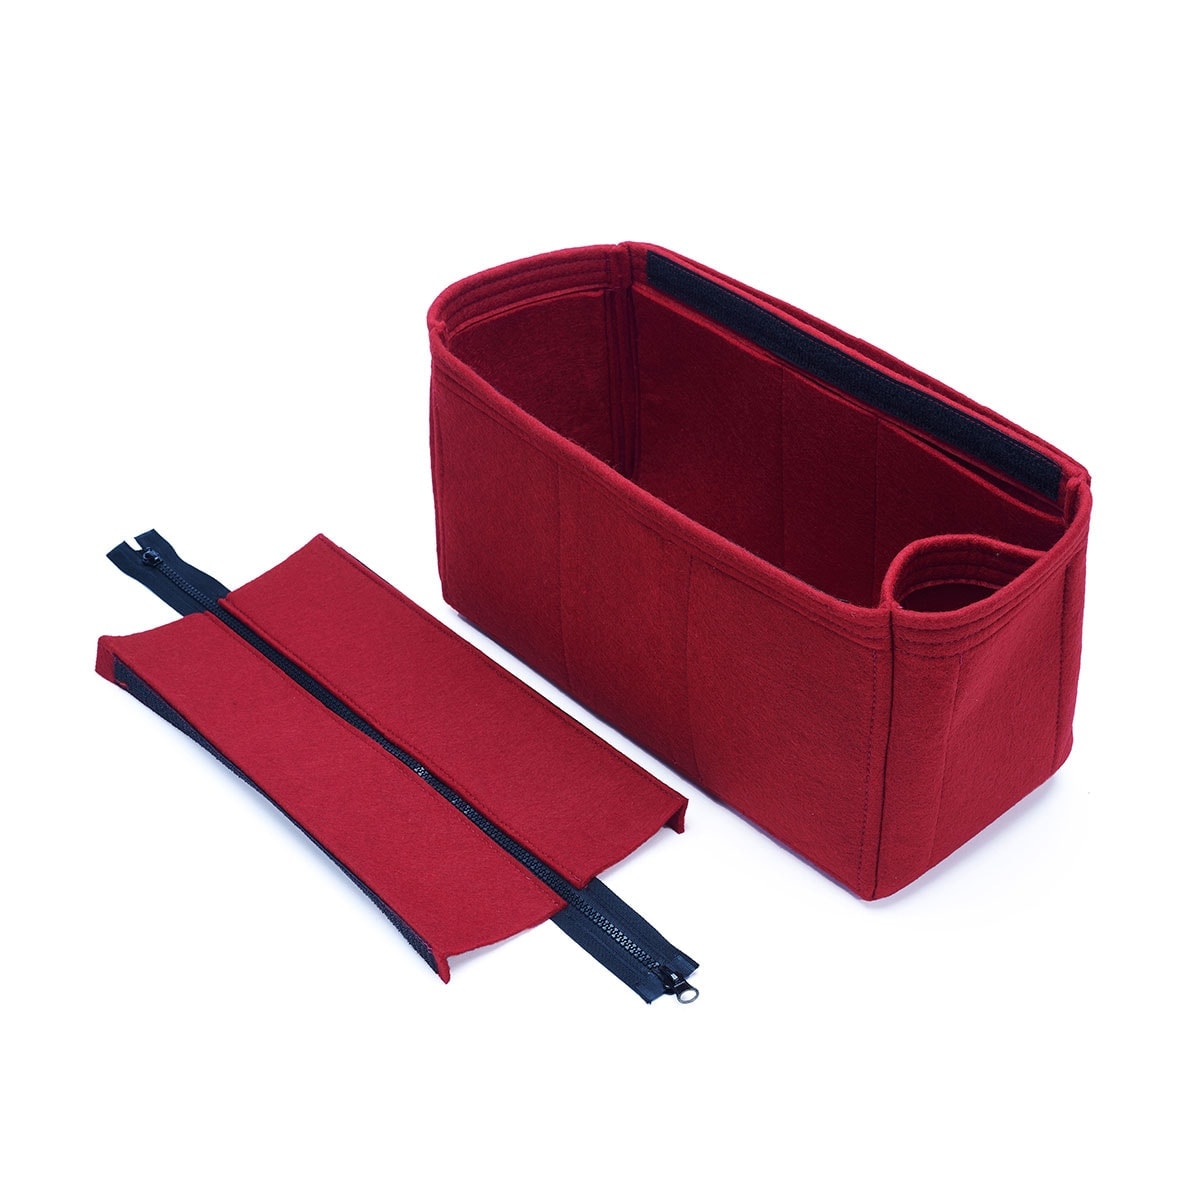 Felt Bag Organizer with Top-Closure Style for Louis Vuitton